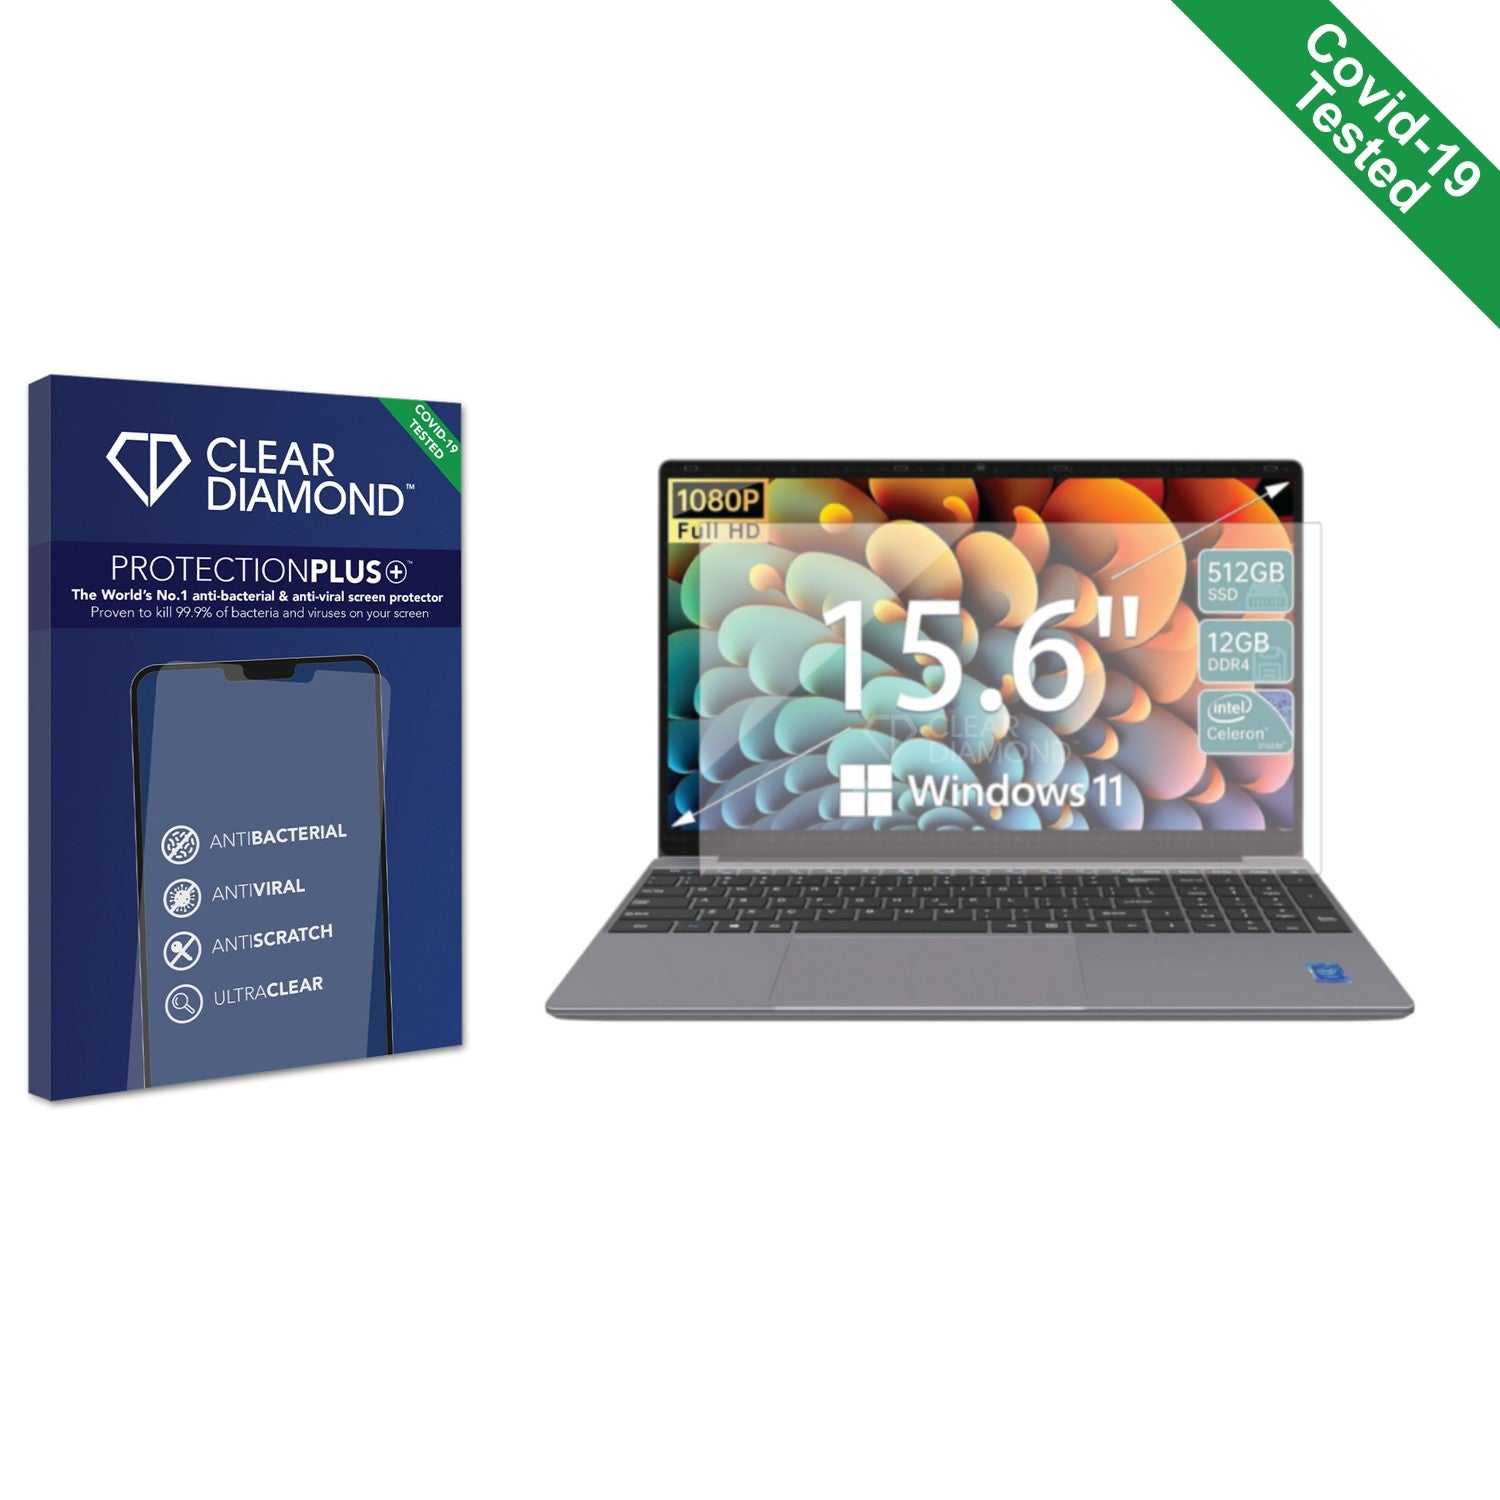 ScreenShield, Clear Diamond Anti-viral Screen Protector for ApoloSign 15.6" Laptop Computer